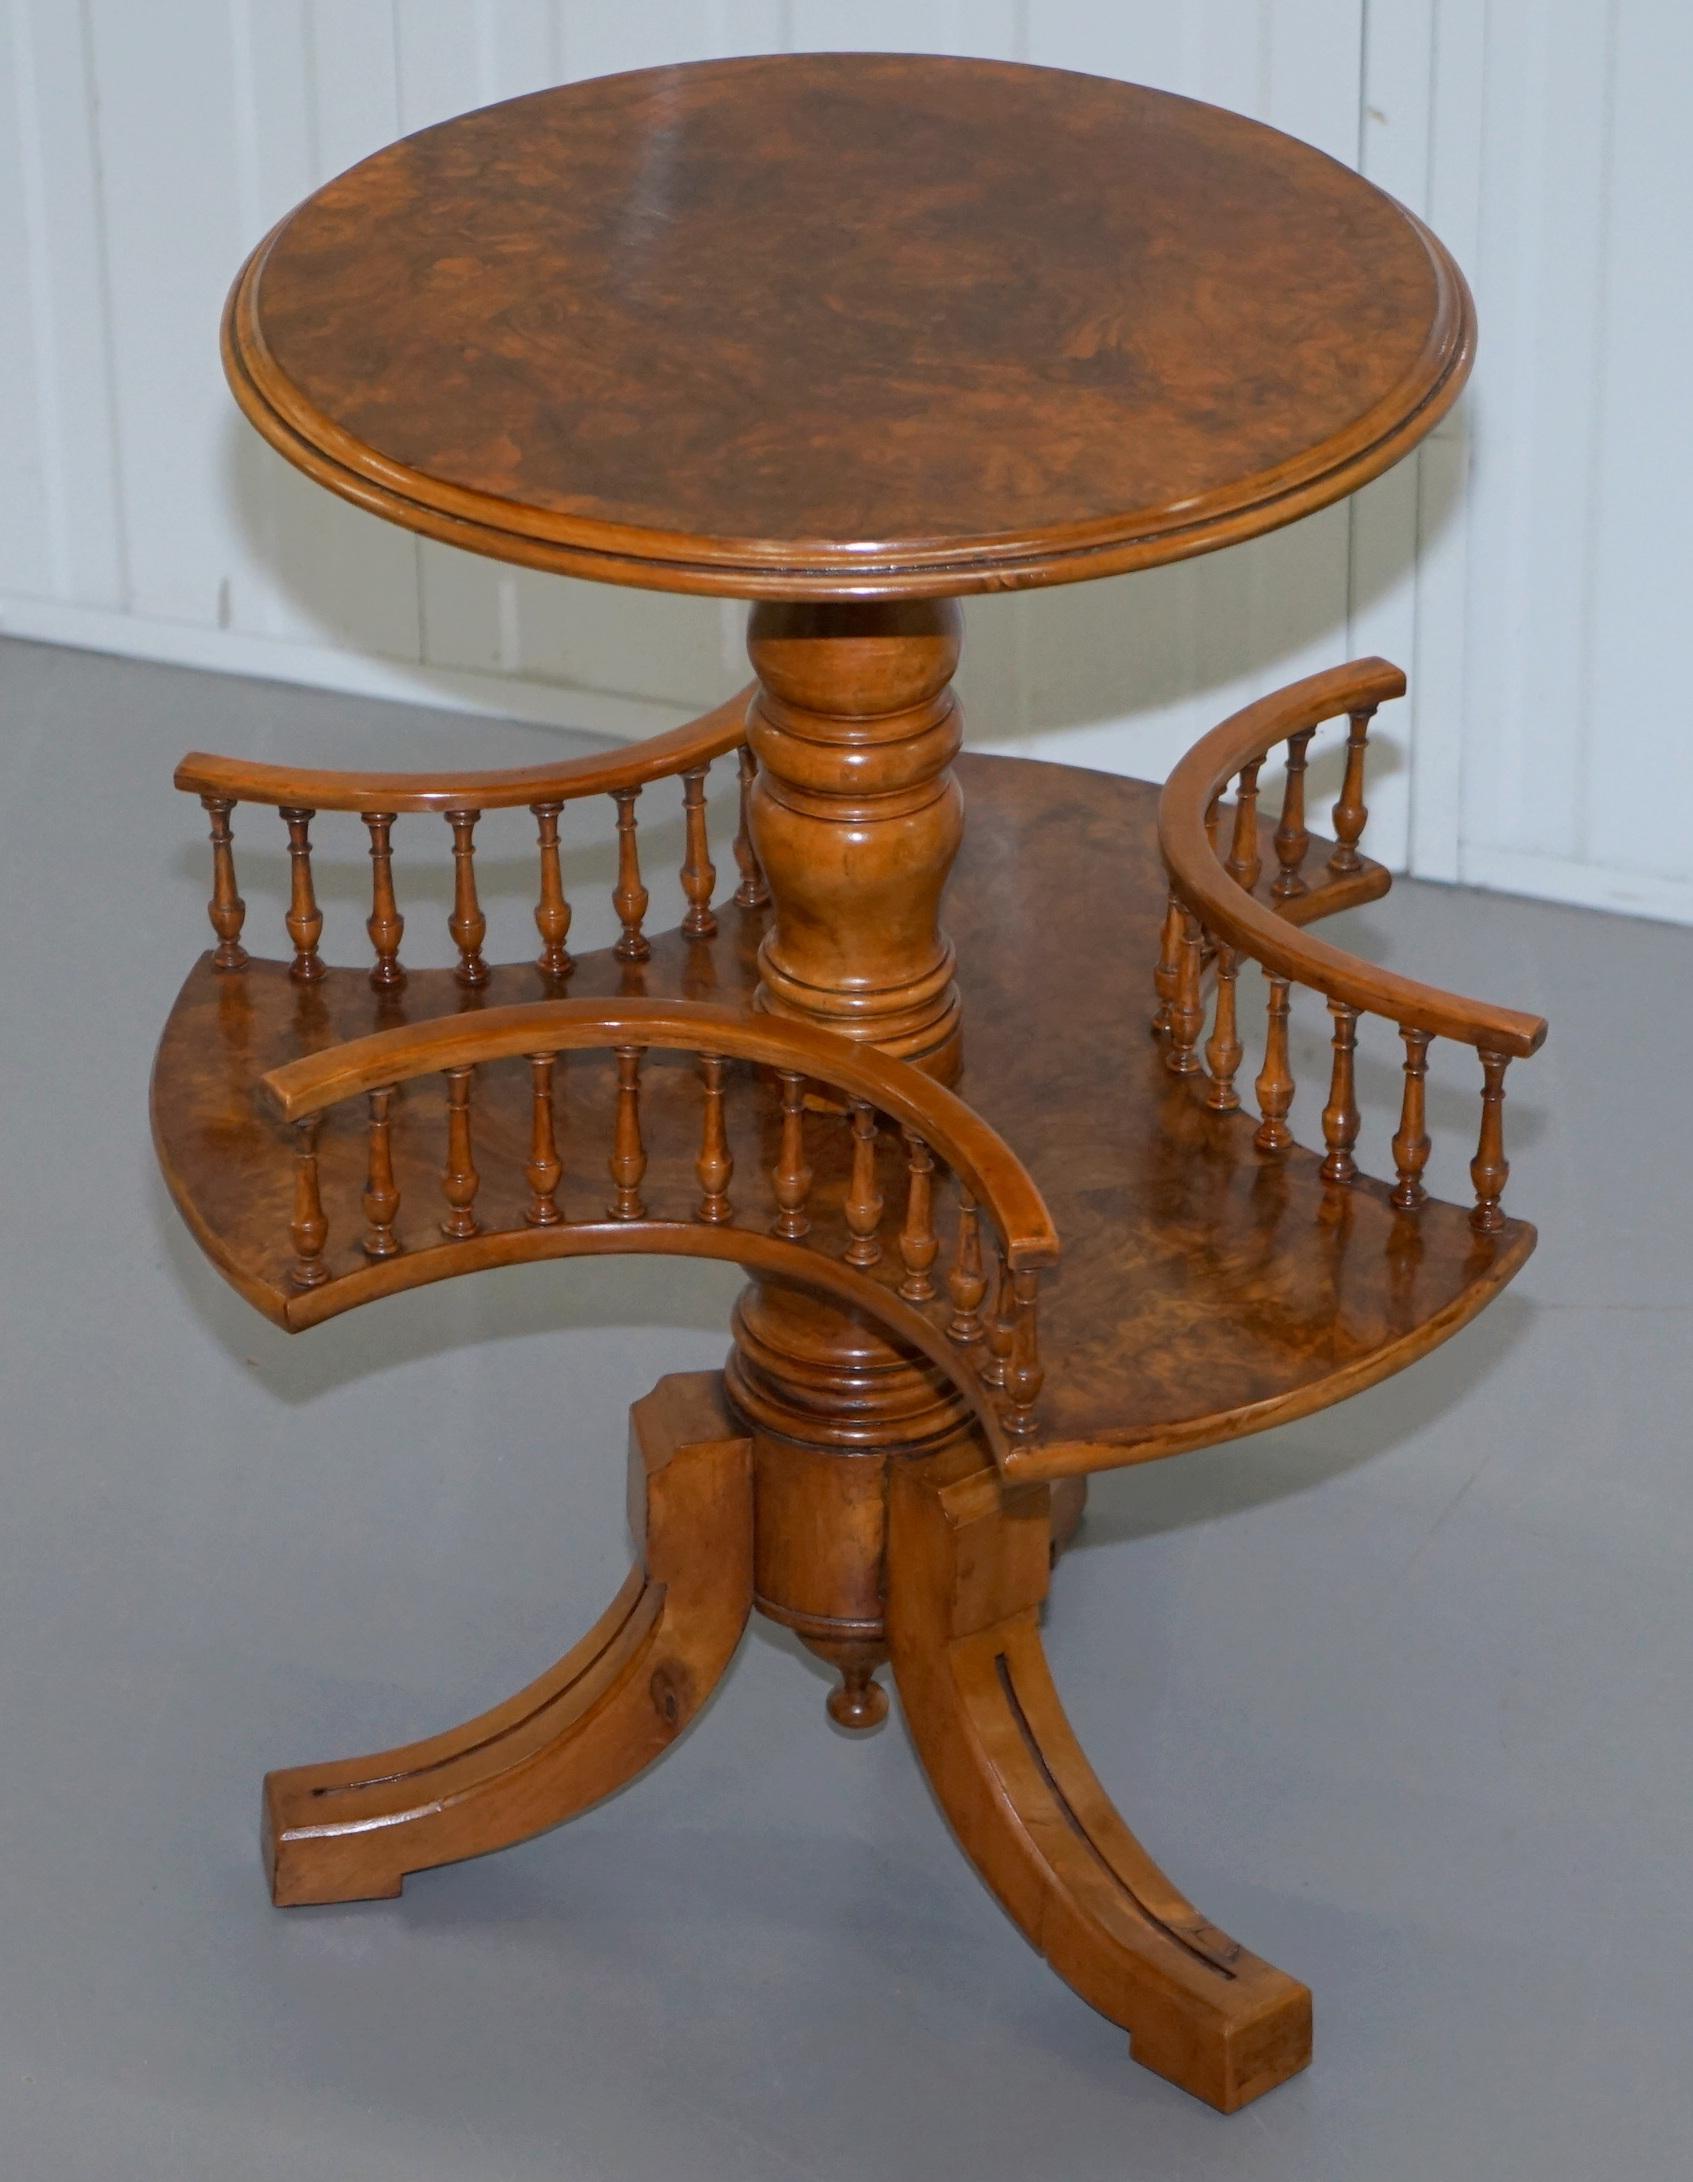 Wimbledon-Furniture

Wimbledon-Furniture is delighted to offer for sale this very rare fully restored Burr Walnut revolving bookcase with gallery rail and side table top

Please note the delivery fee listed is just a guide, it covers within the